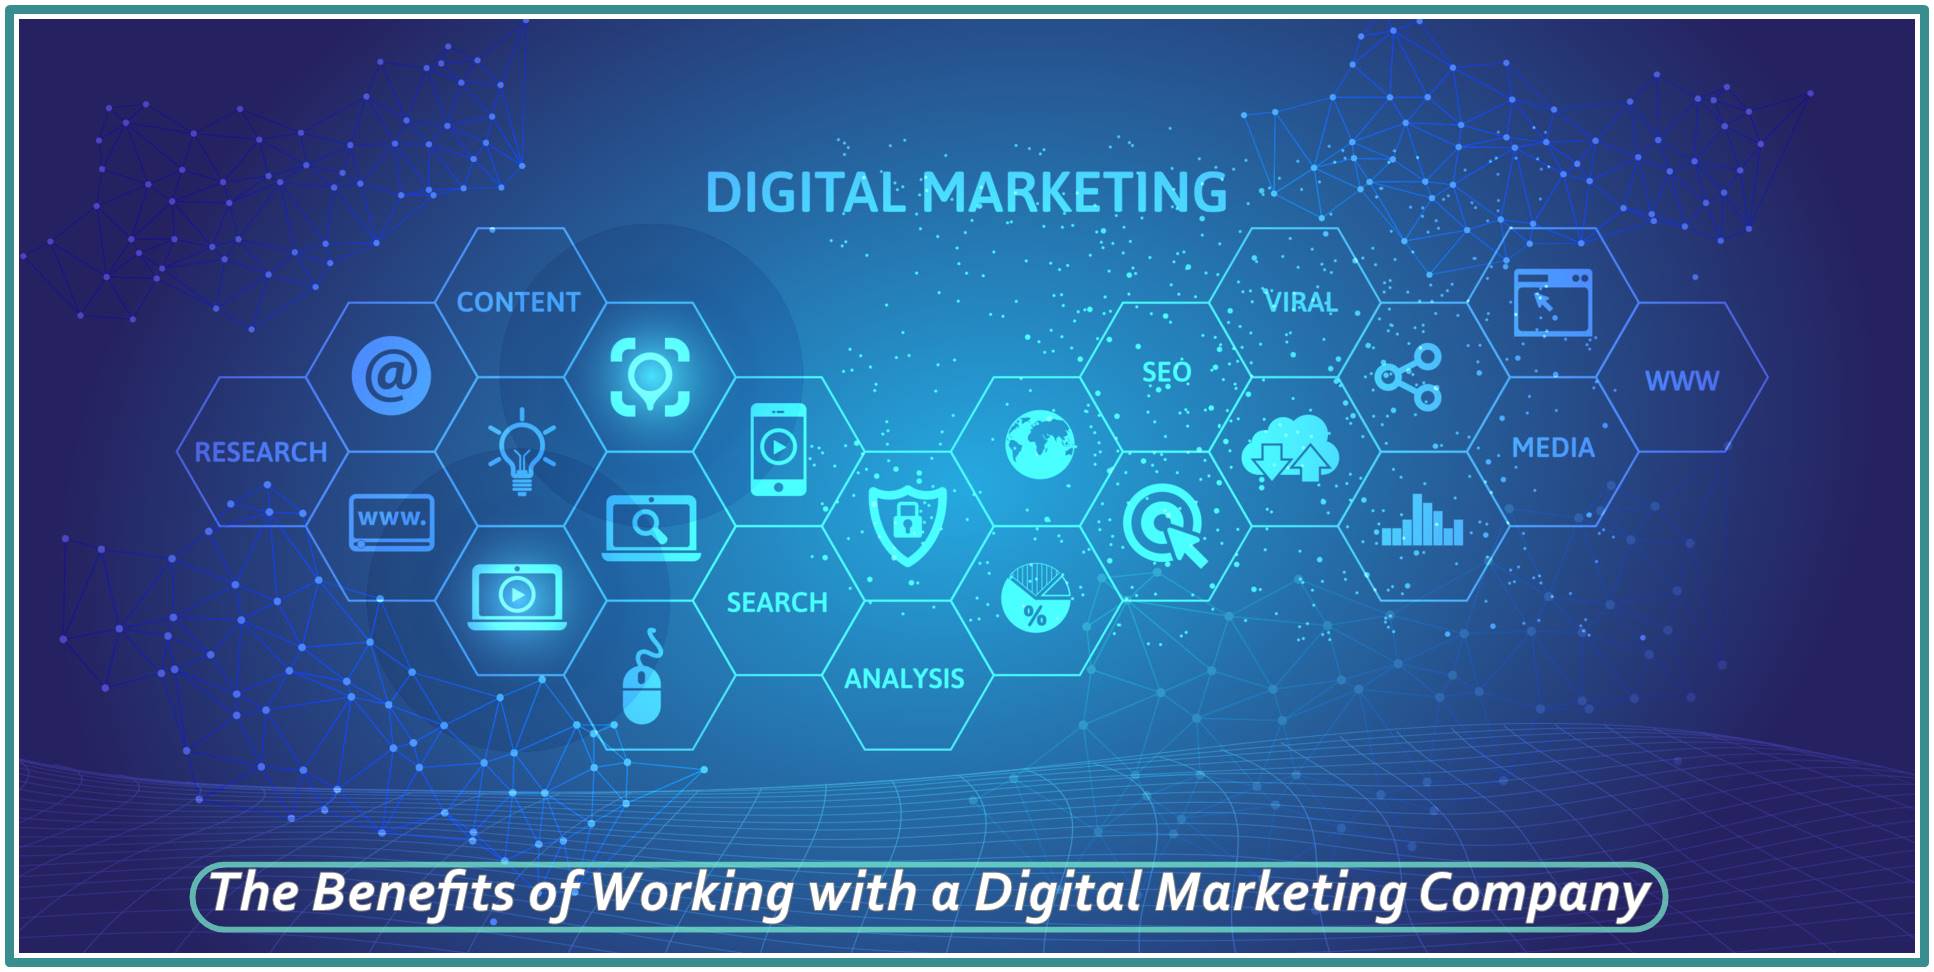 The Benefits of Working with a Digital Marketing Company